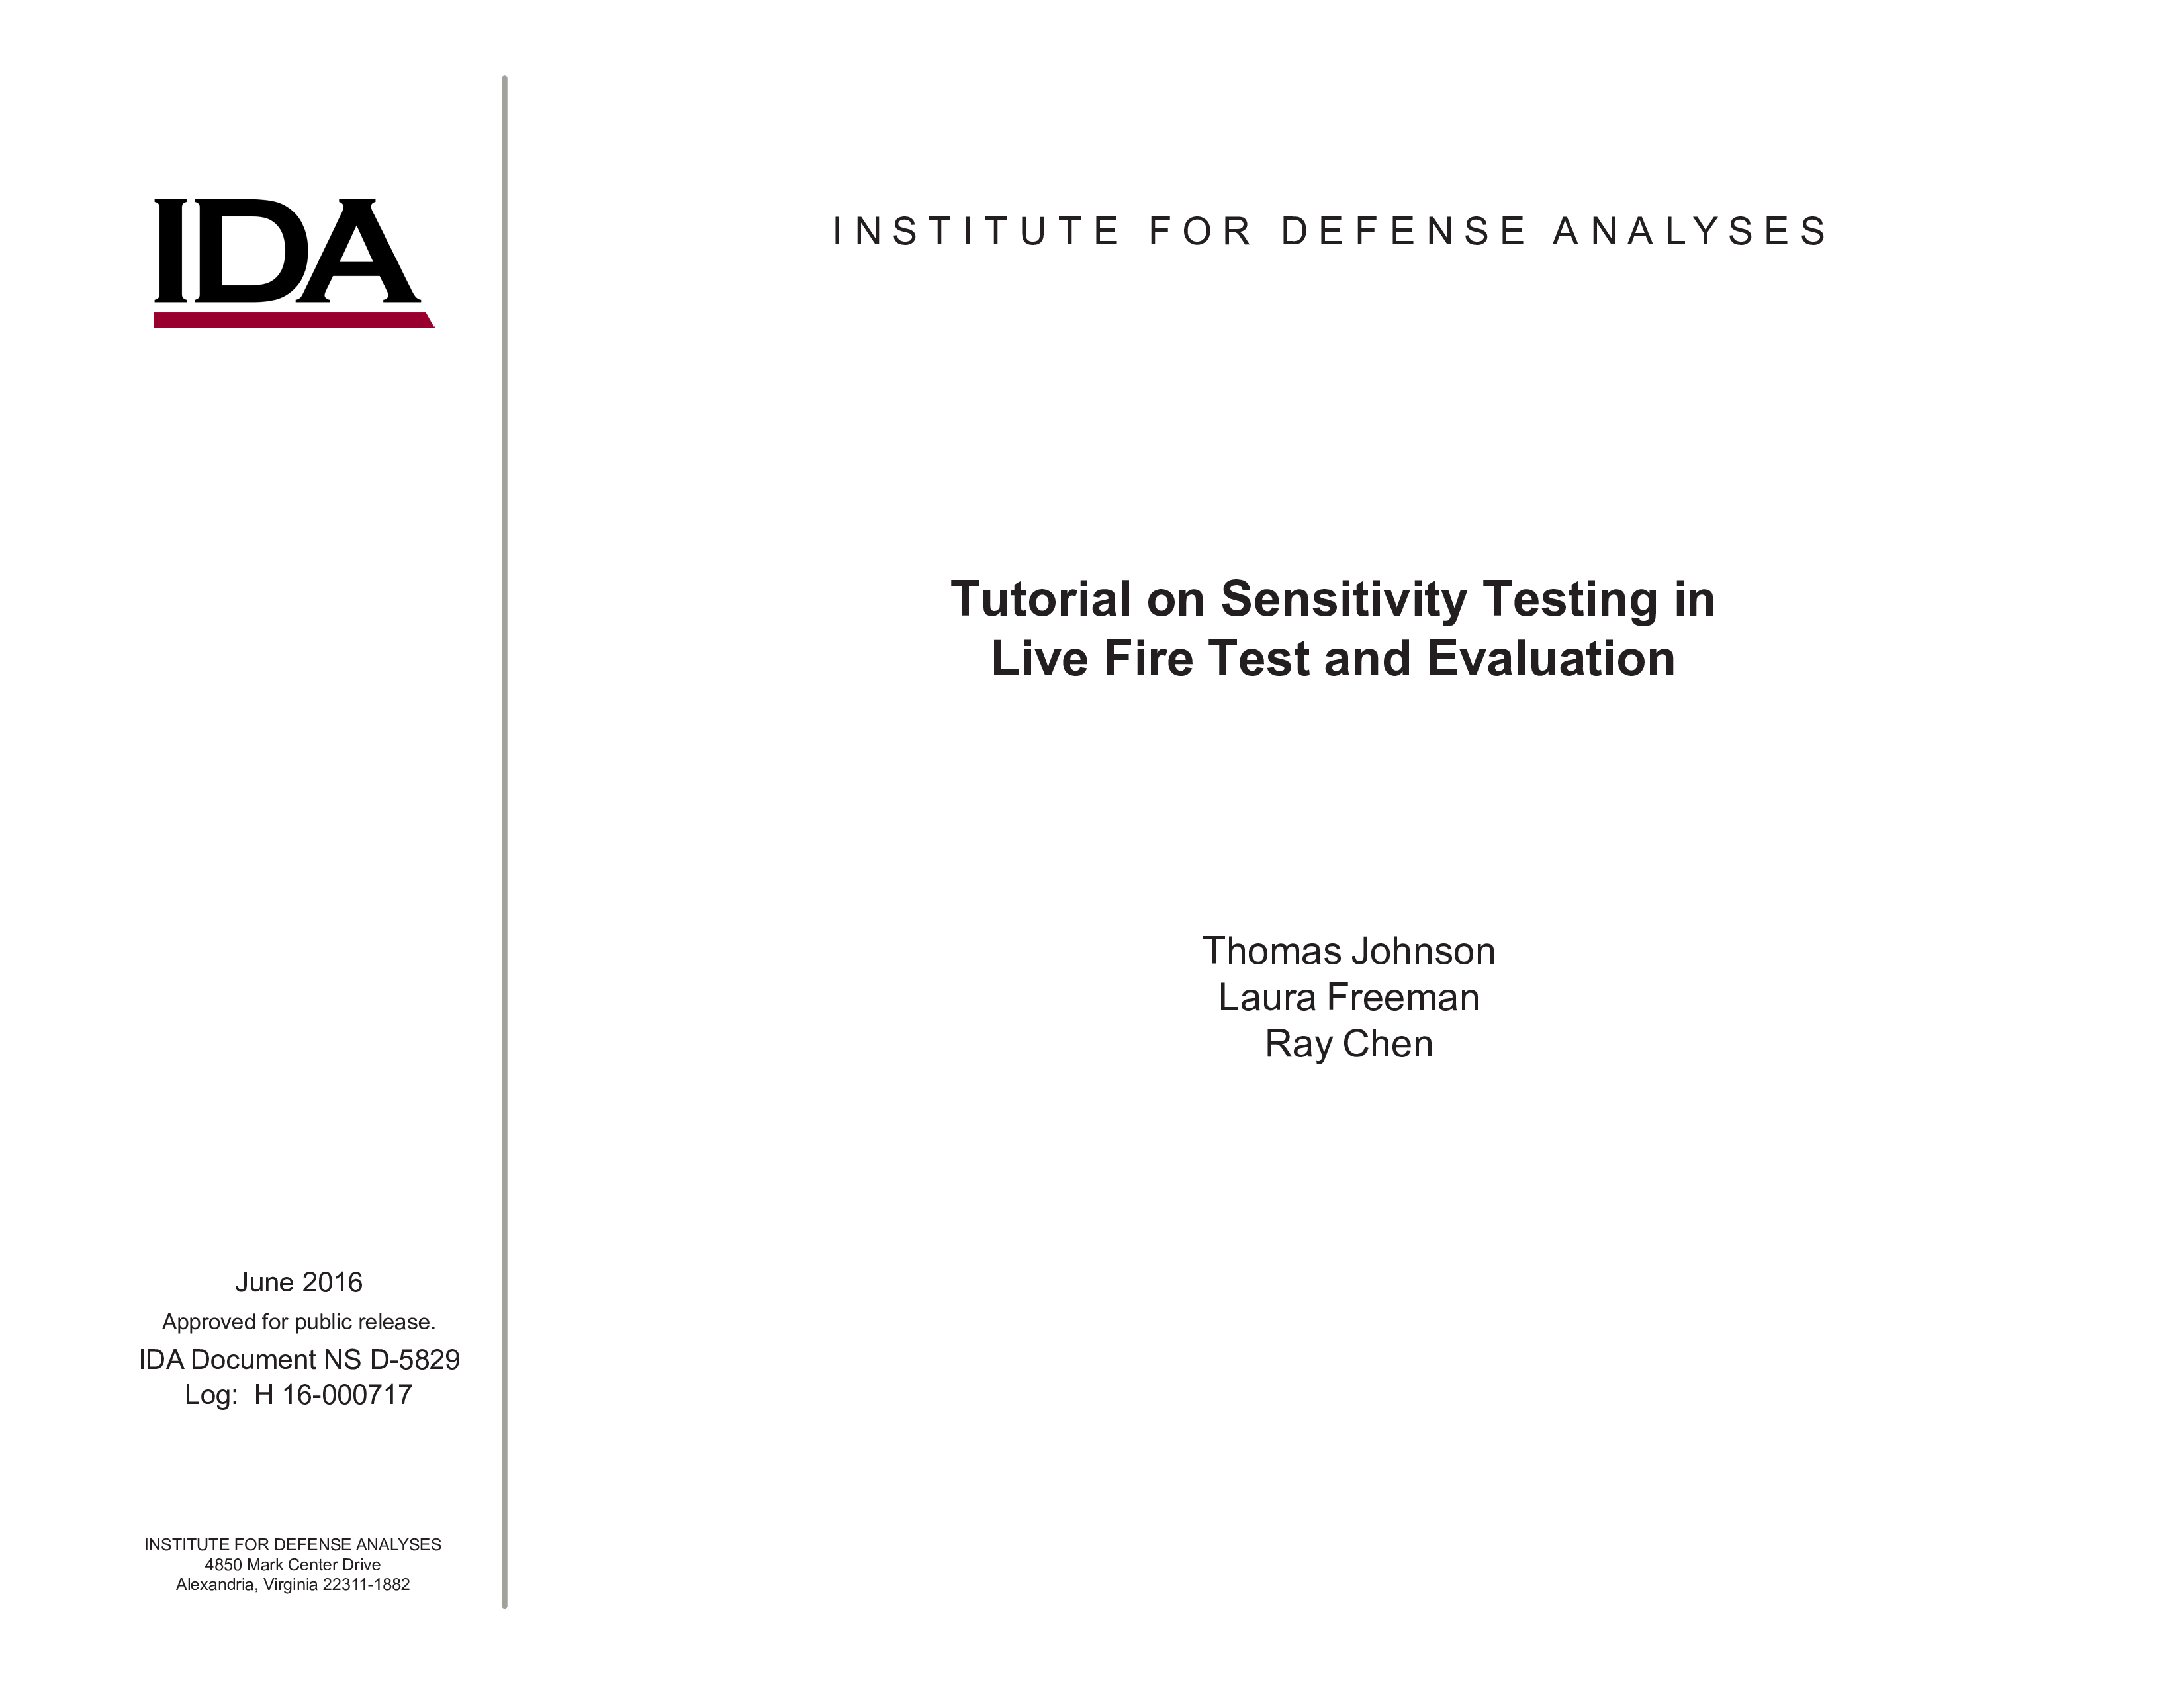 Tutorial on Sensitivity Testing in Live Fire Test and Evaluation